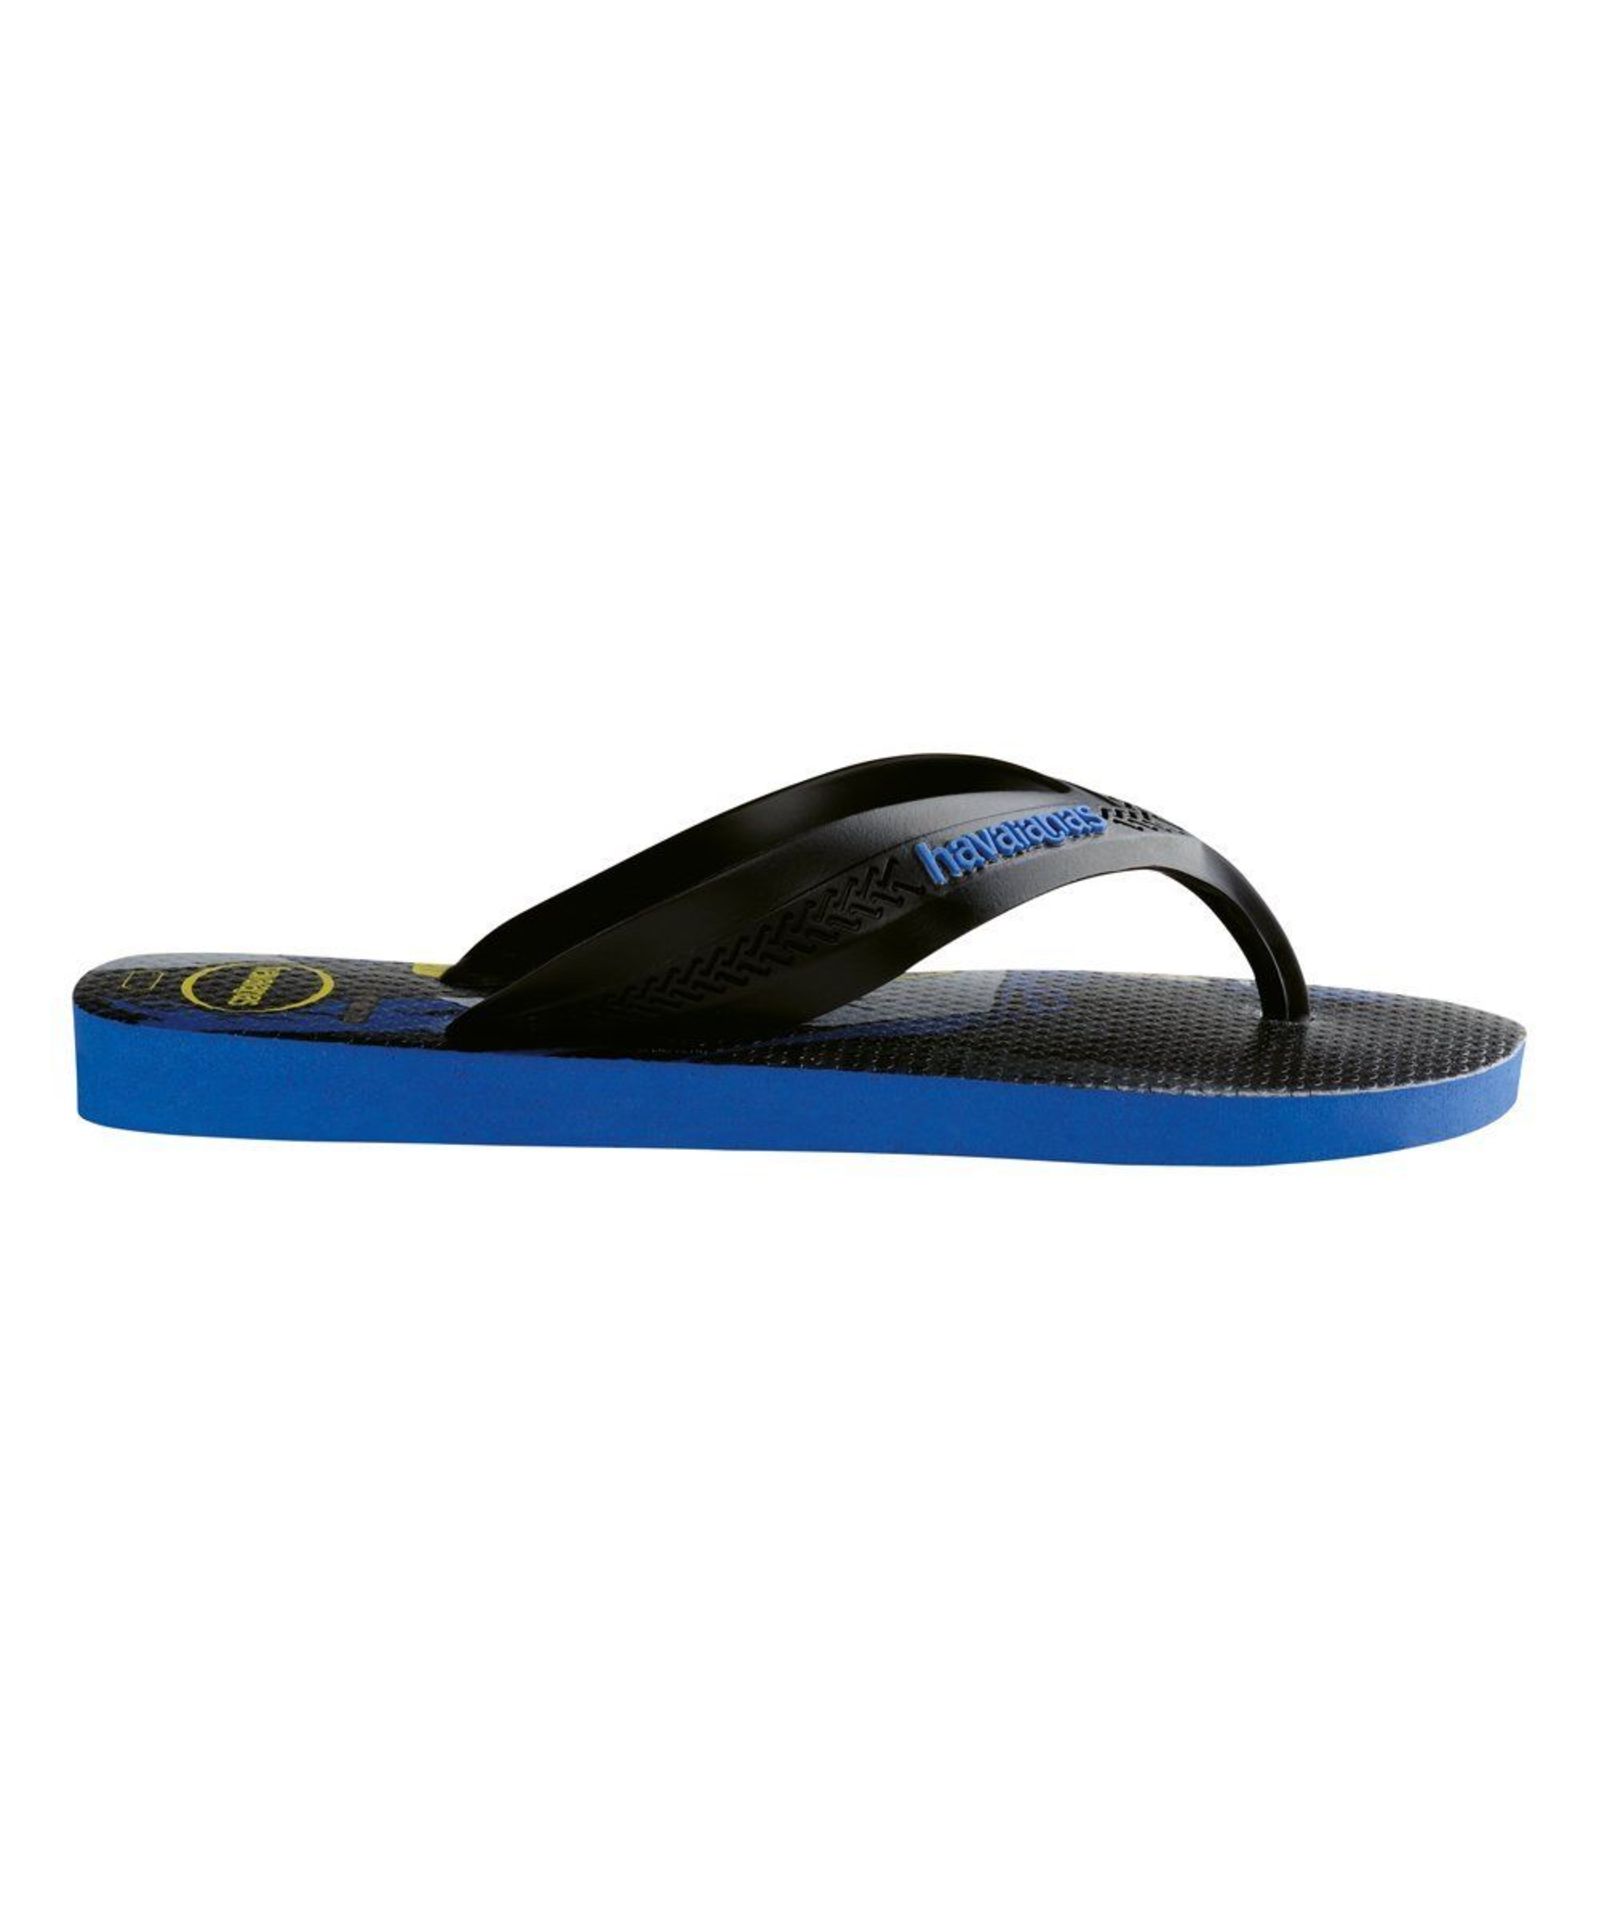 Havaianas Black & Blue Star Max Heroes Flip-Flops (Uk Size 12:Us Size 13) (New without box) [Ref: - Image 4 of 4